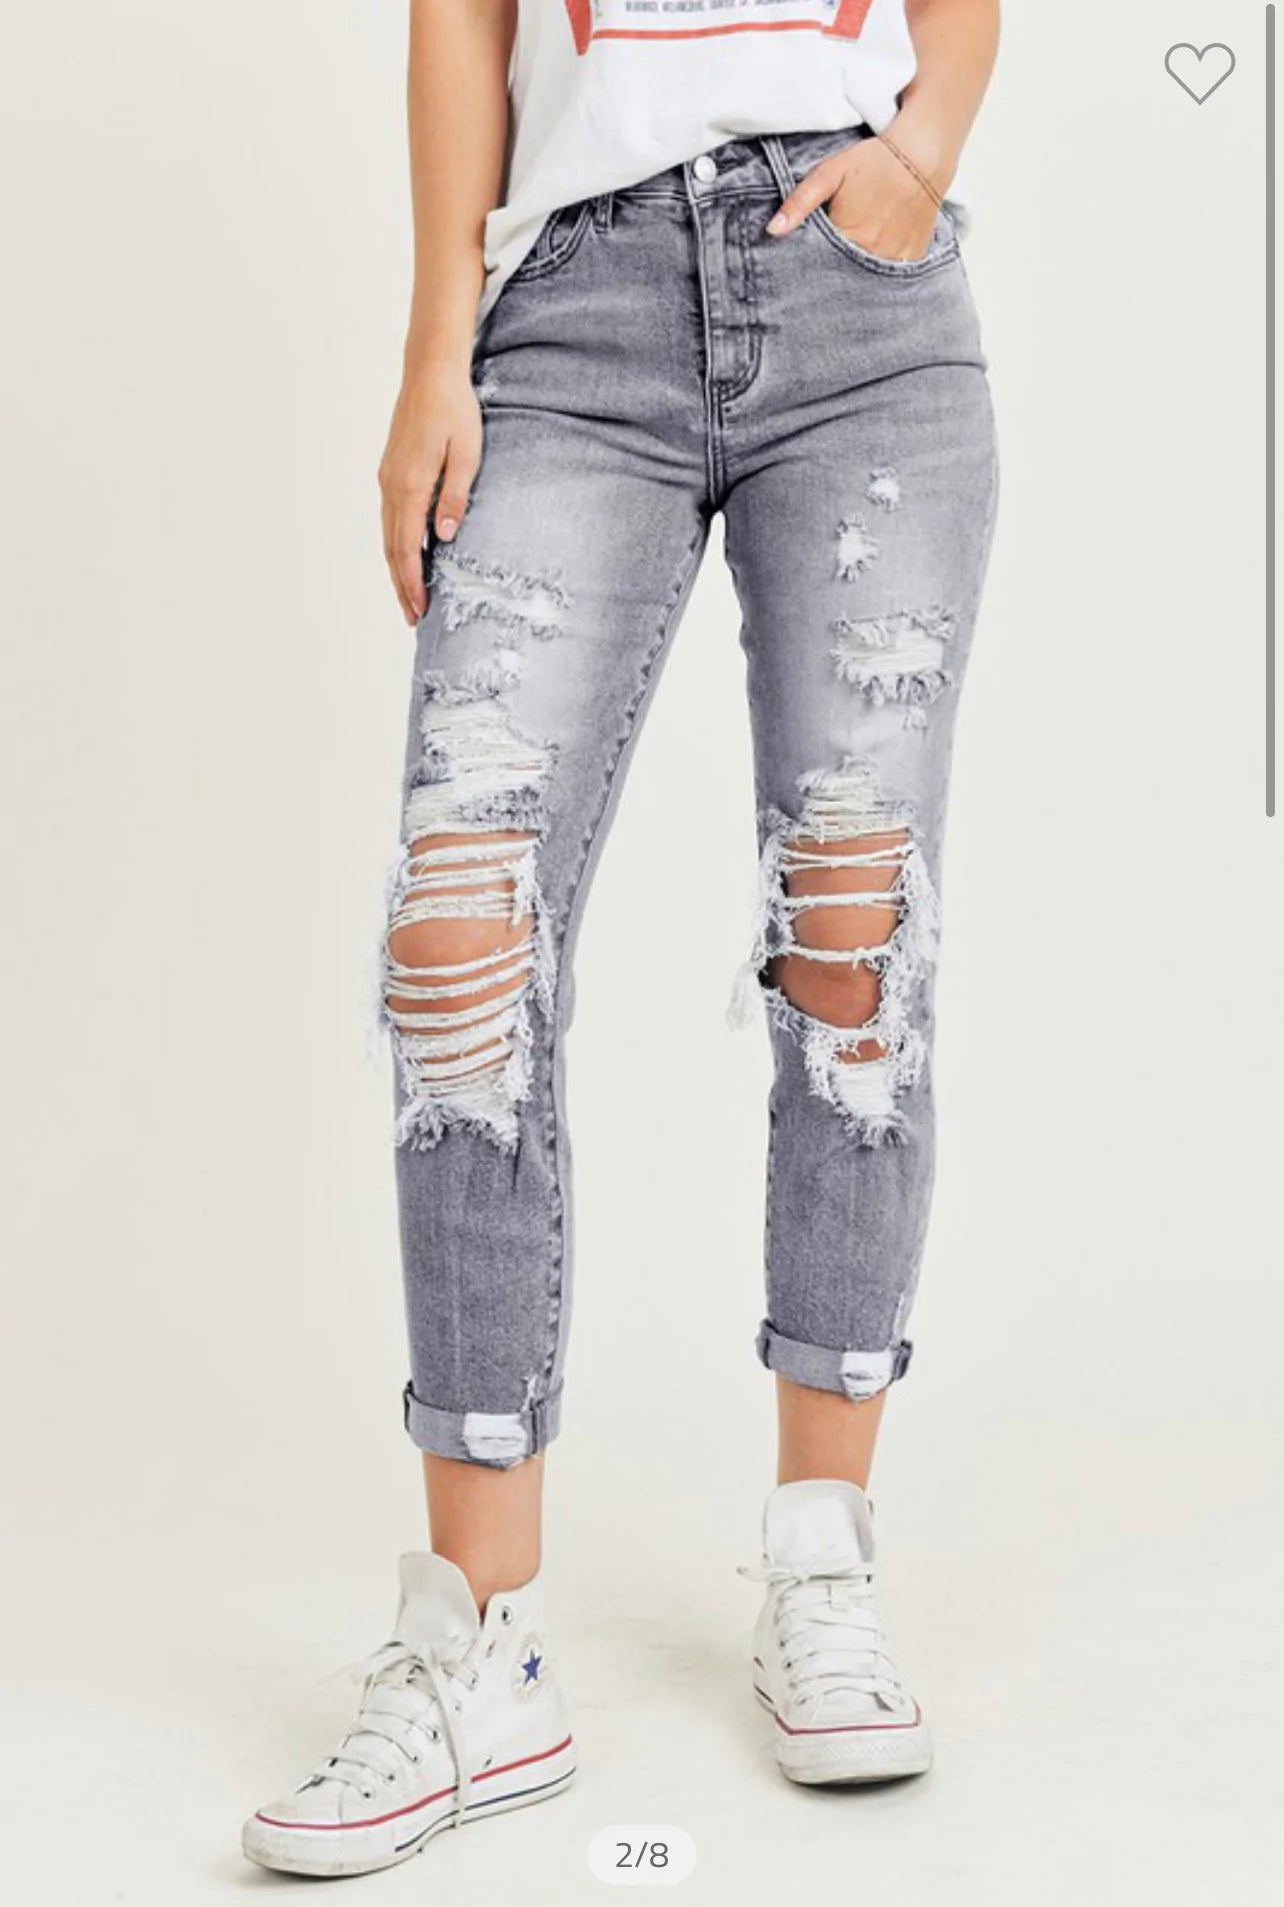 Women's Ripped Jeans, Ripped Mom & Skinny Jeans